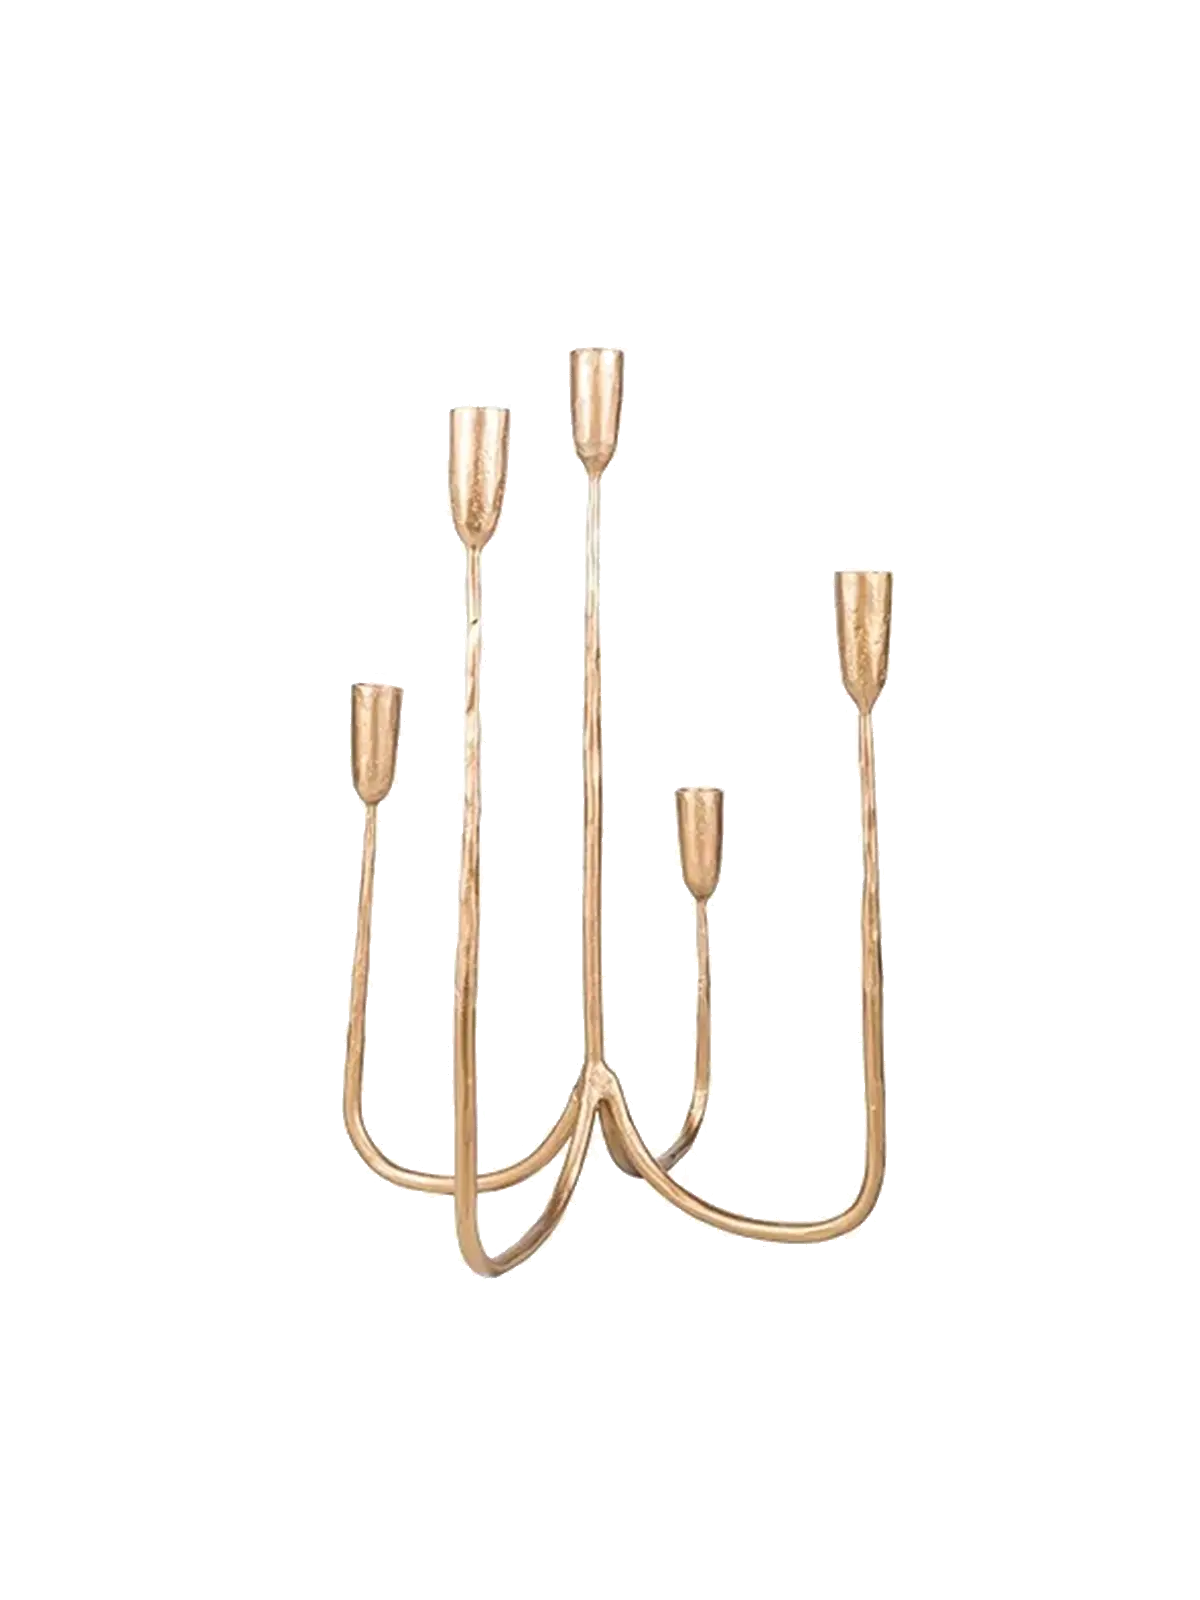 Cluster Candelabra French Country Collections